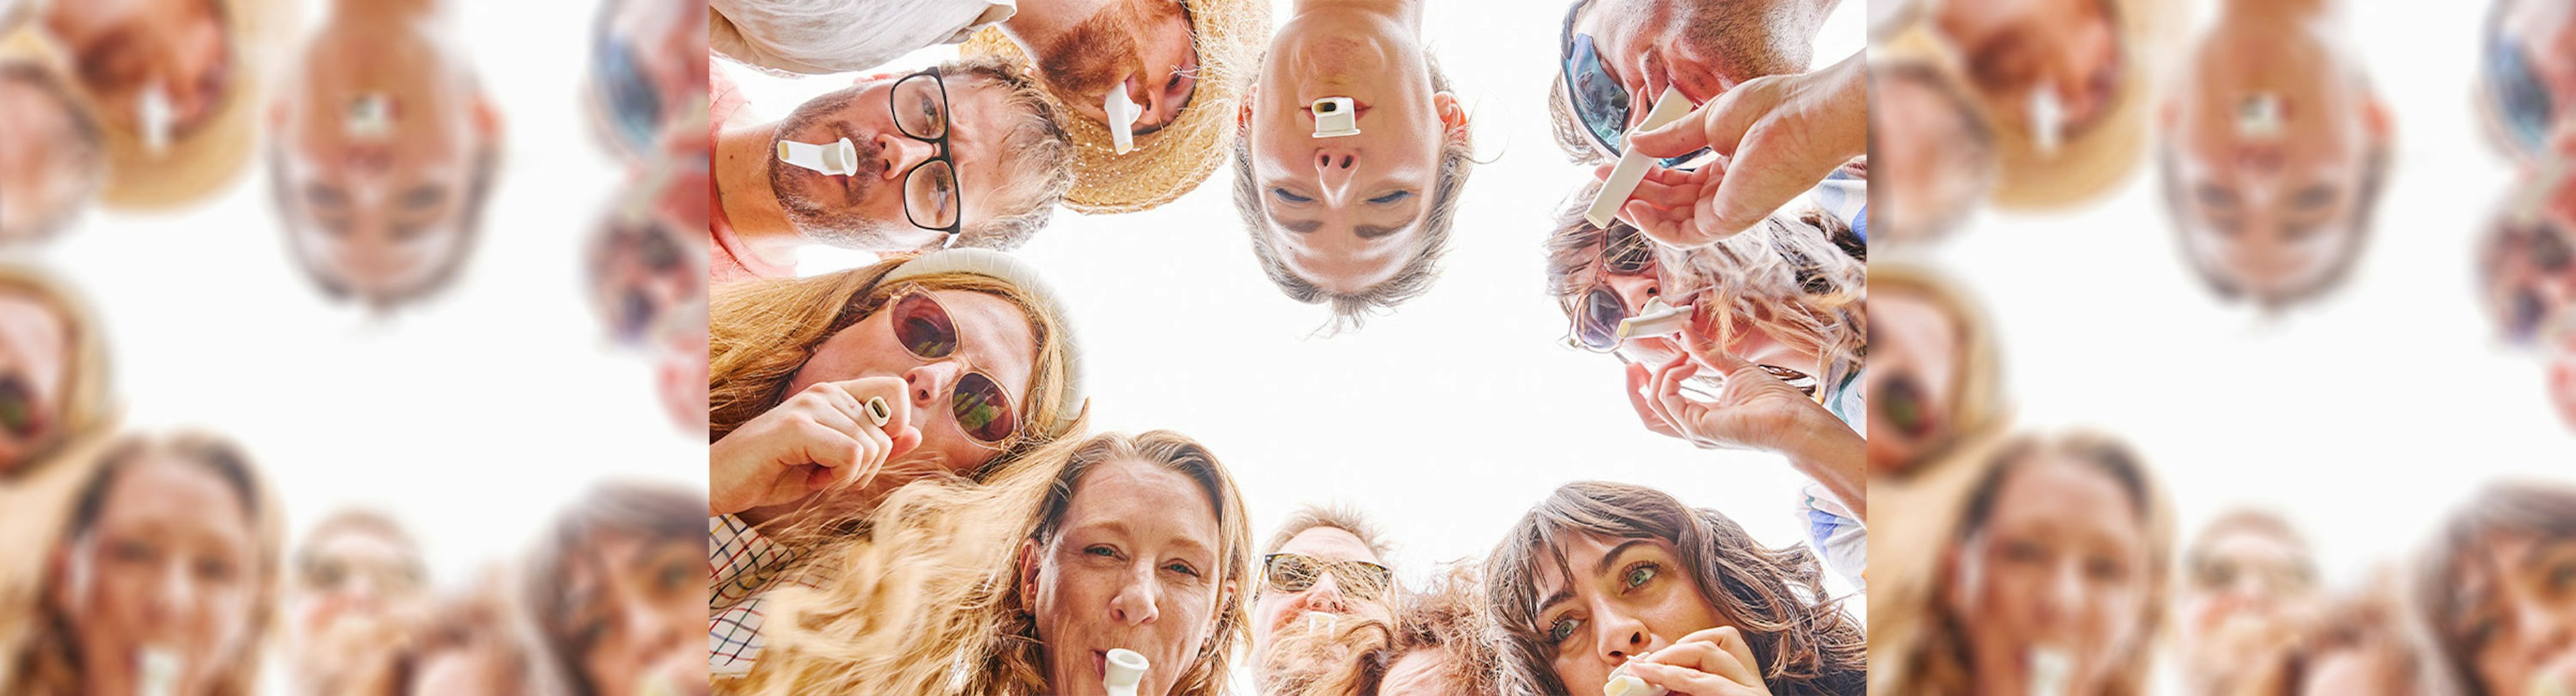 A group of people in a circle looking down at the camera with kazoos in their mouths